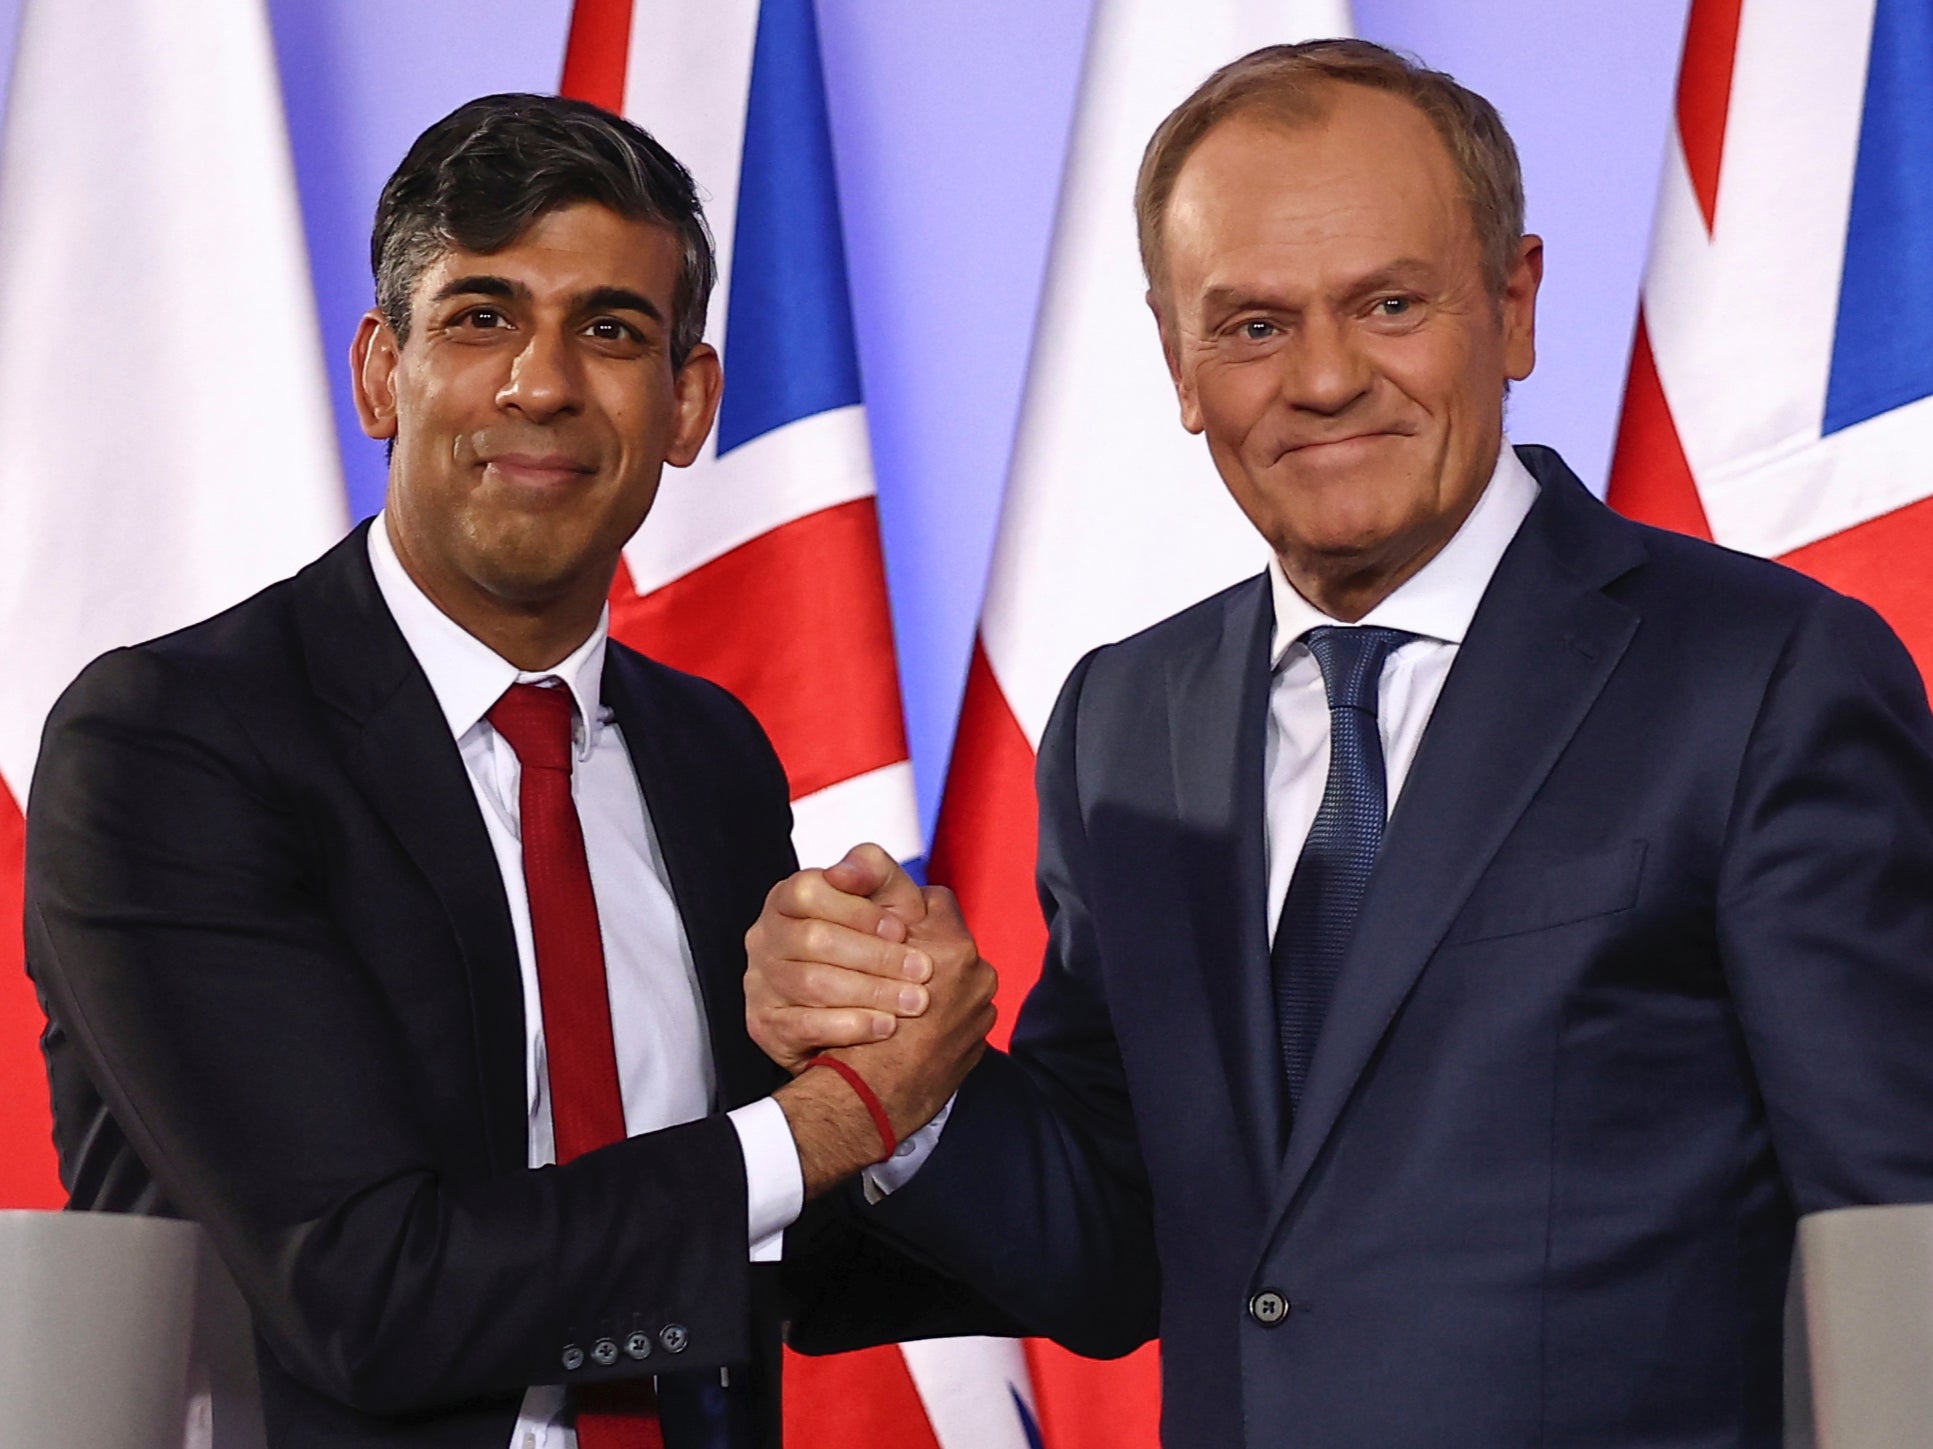 Last week, prime minister Rishi Sunak visited Poland to meet with Mr Tusk for talks about aid for Ukraine.